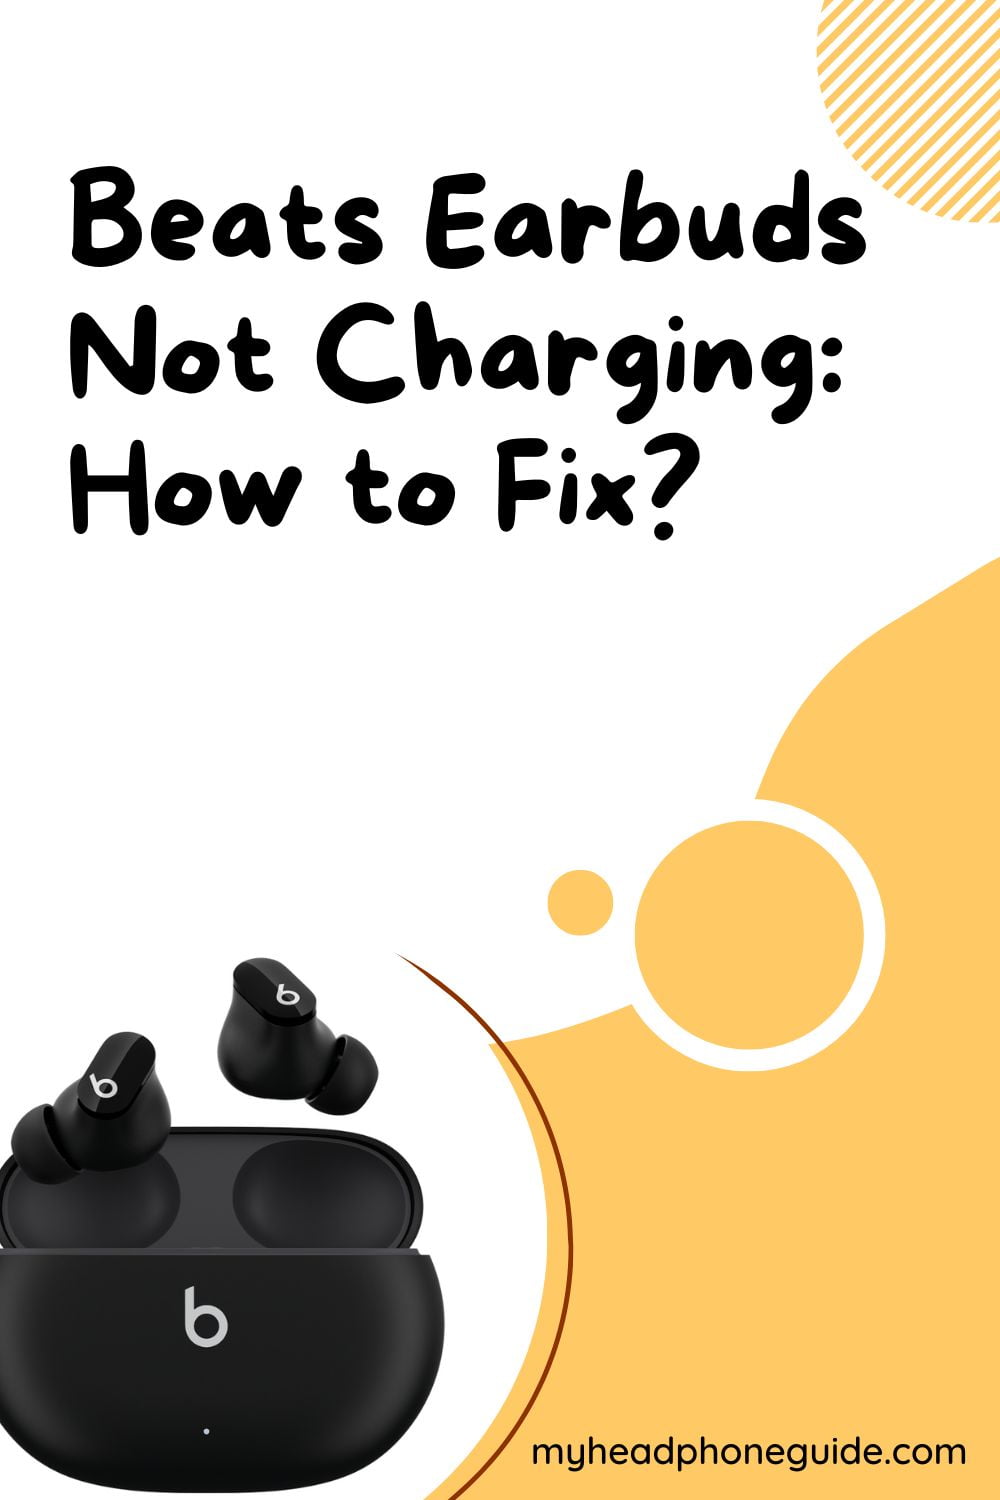 Beats Earbuds Not Charging: How to Fix?